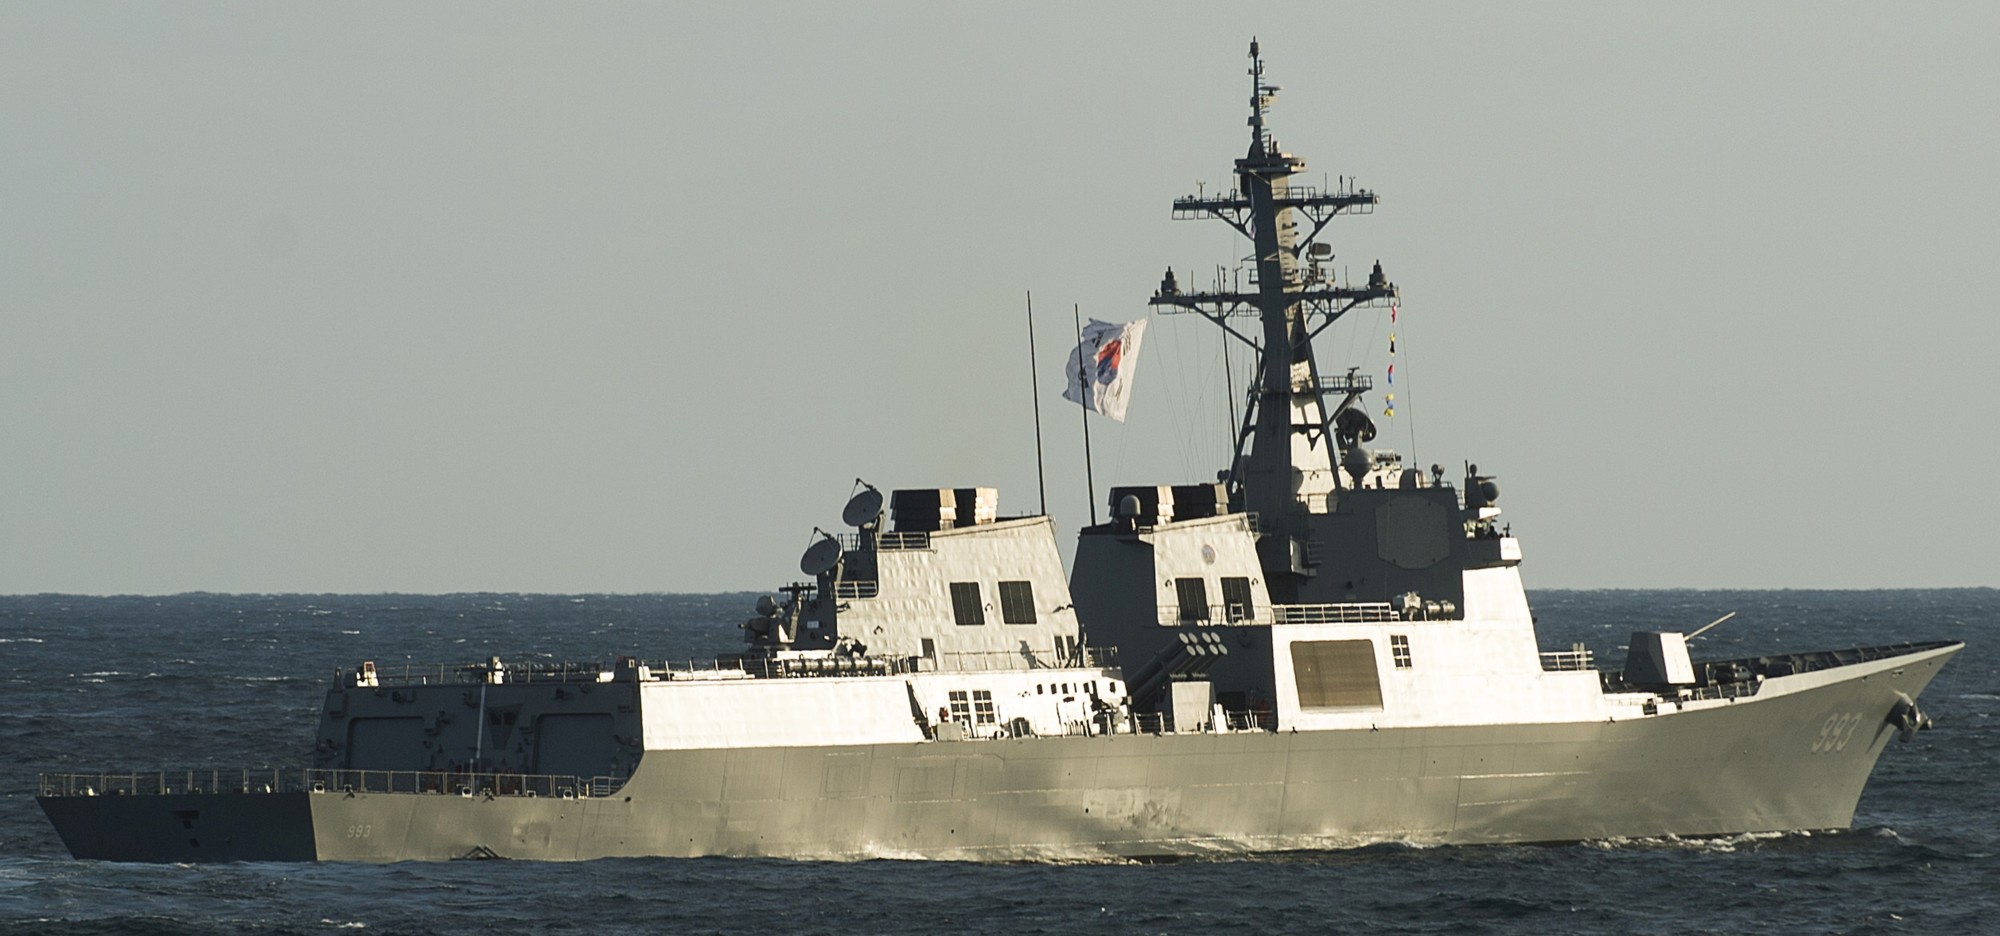 ddg-993 roks seoae ryu seong-ryong sejong the great class guided missile destroyer aegis republic of korea navy rokn 09